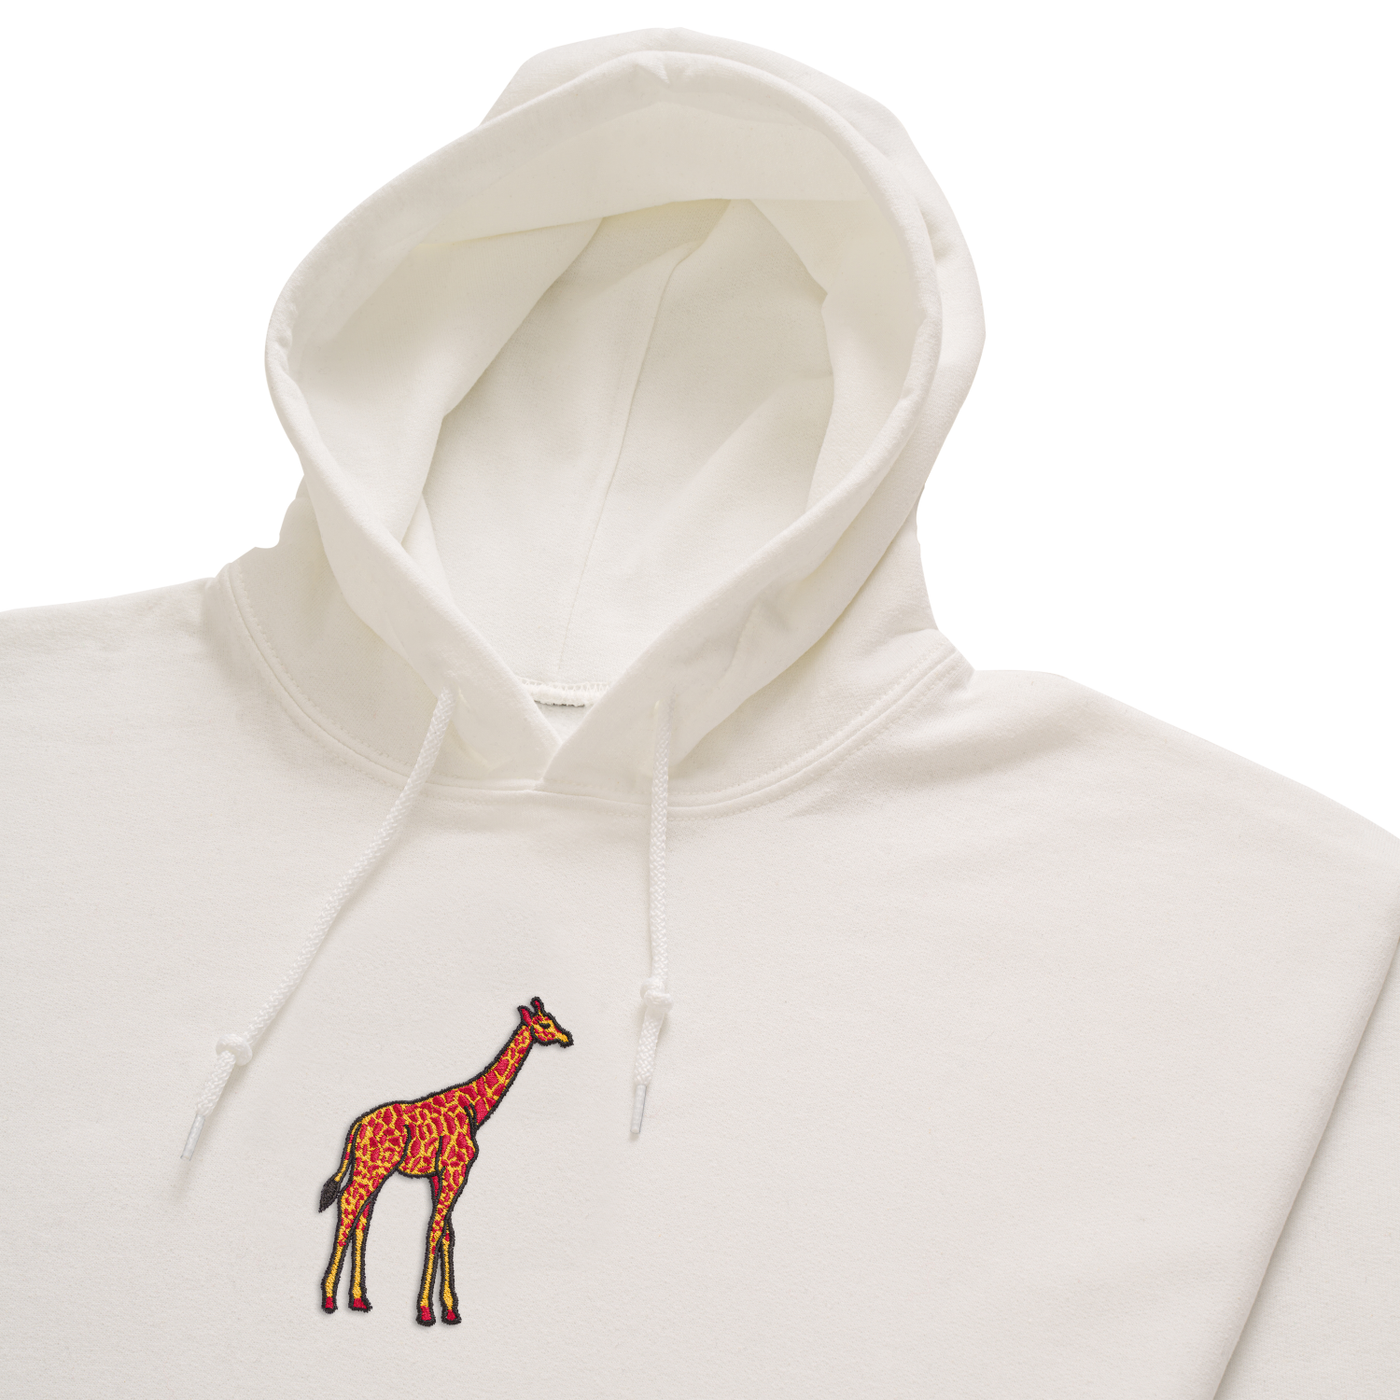 Bobby's Planet Women's Embroidered Giraffe Hoodie from African Animals Collection in White Color#color_white